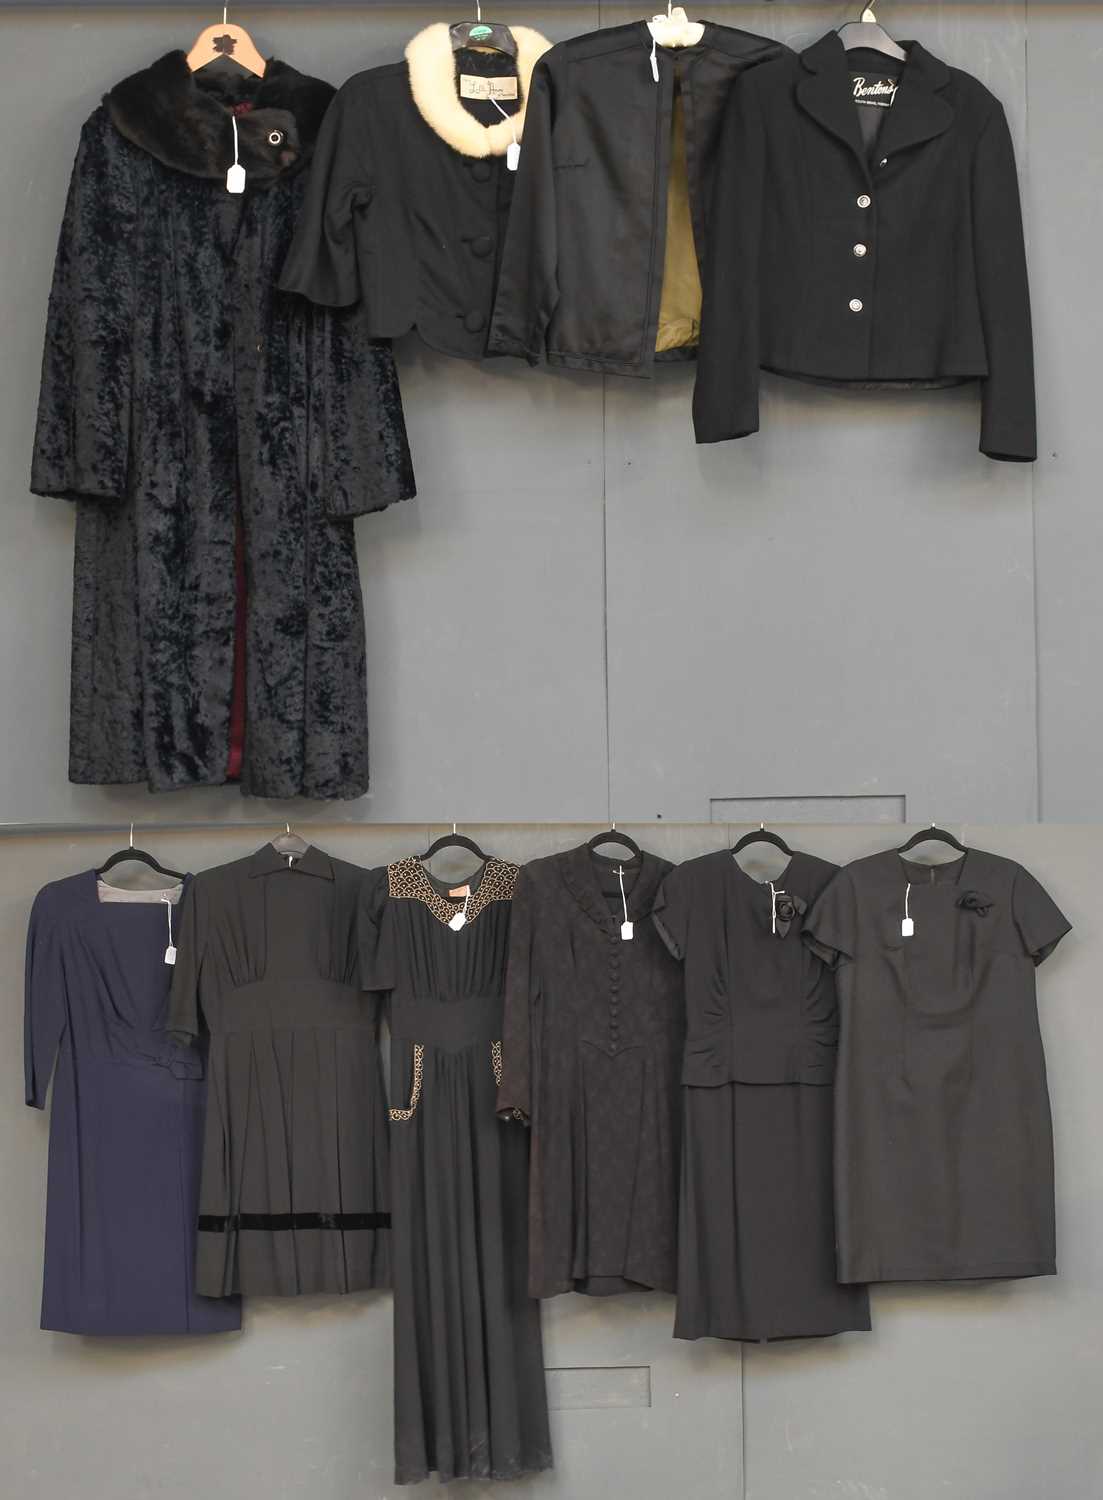 Circa 1950s and Later Occasion Dresses and Coats, comprising a Schüza Kleid black textured shift